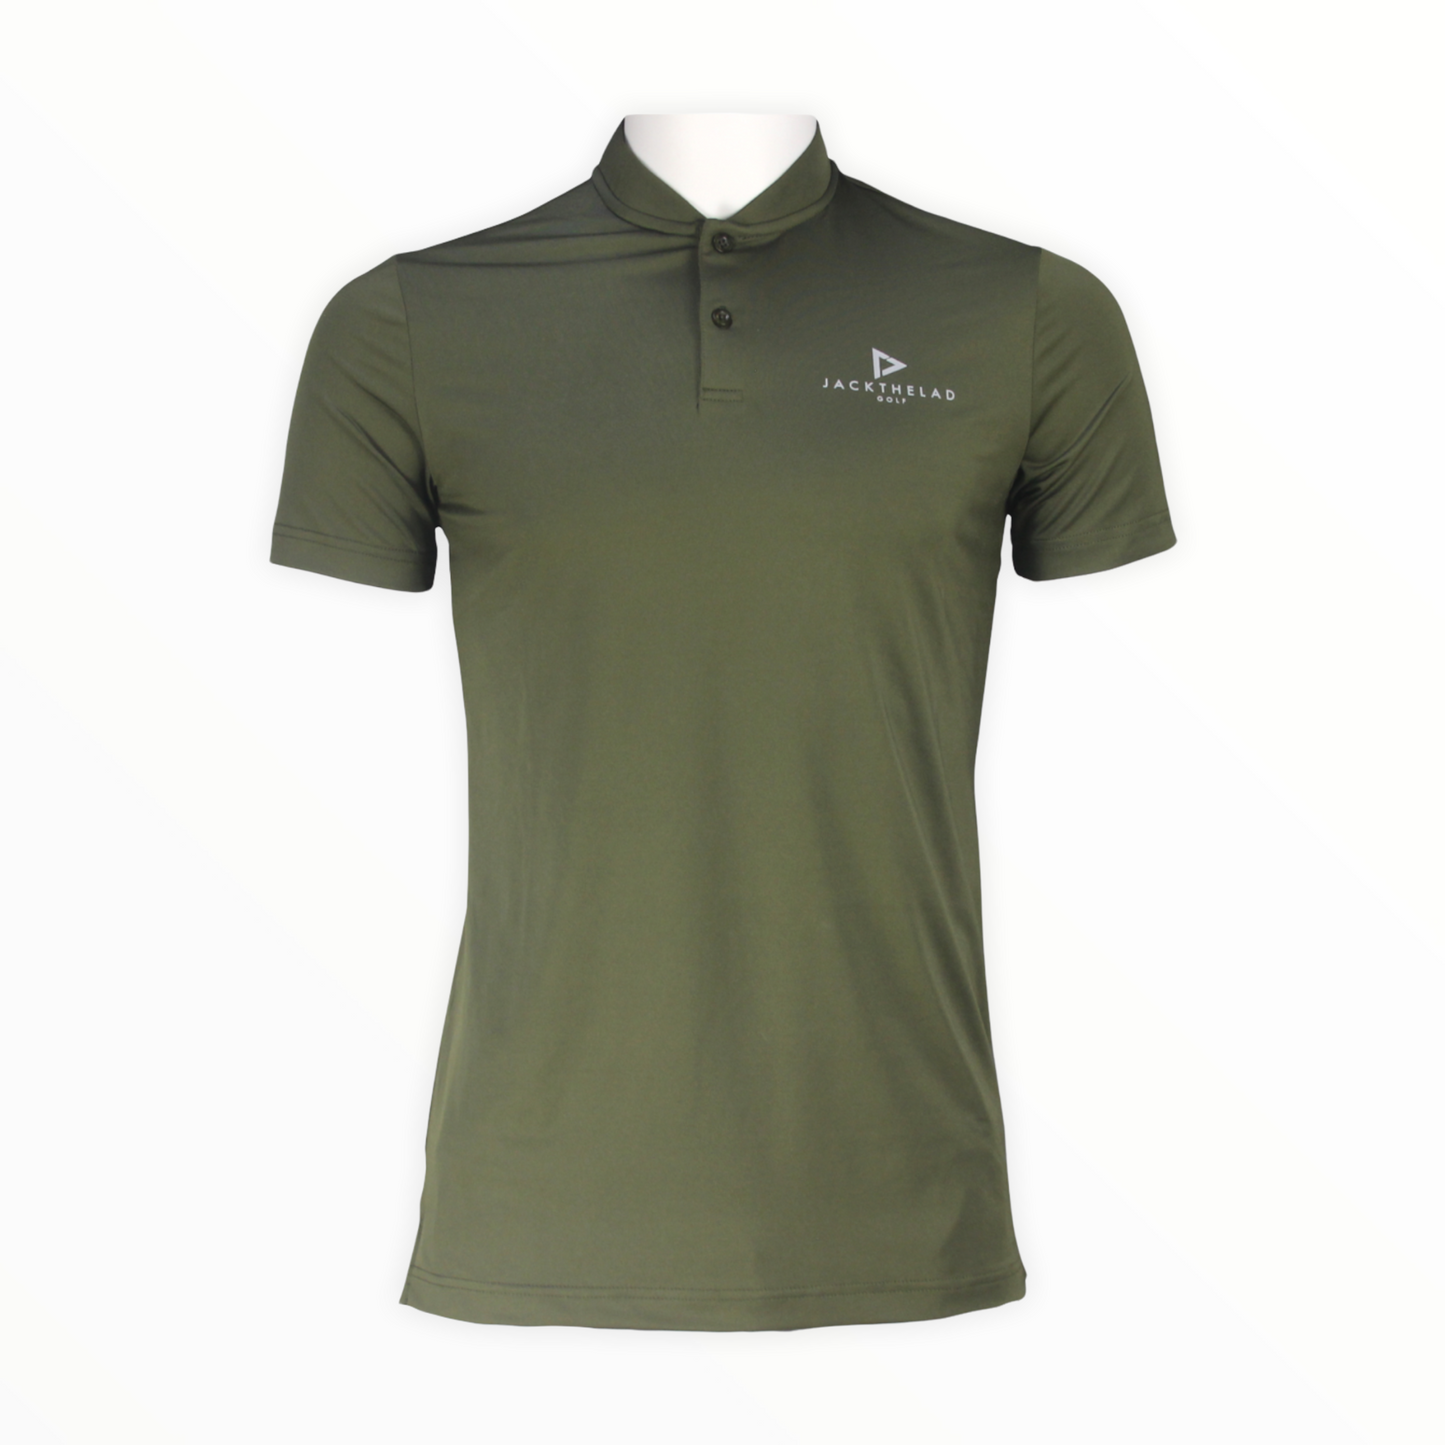 Edge golf polo - front view